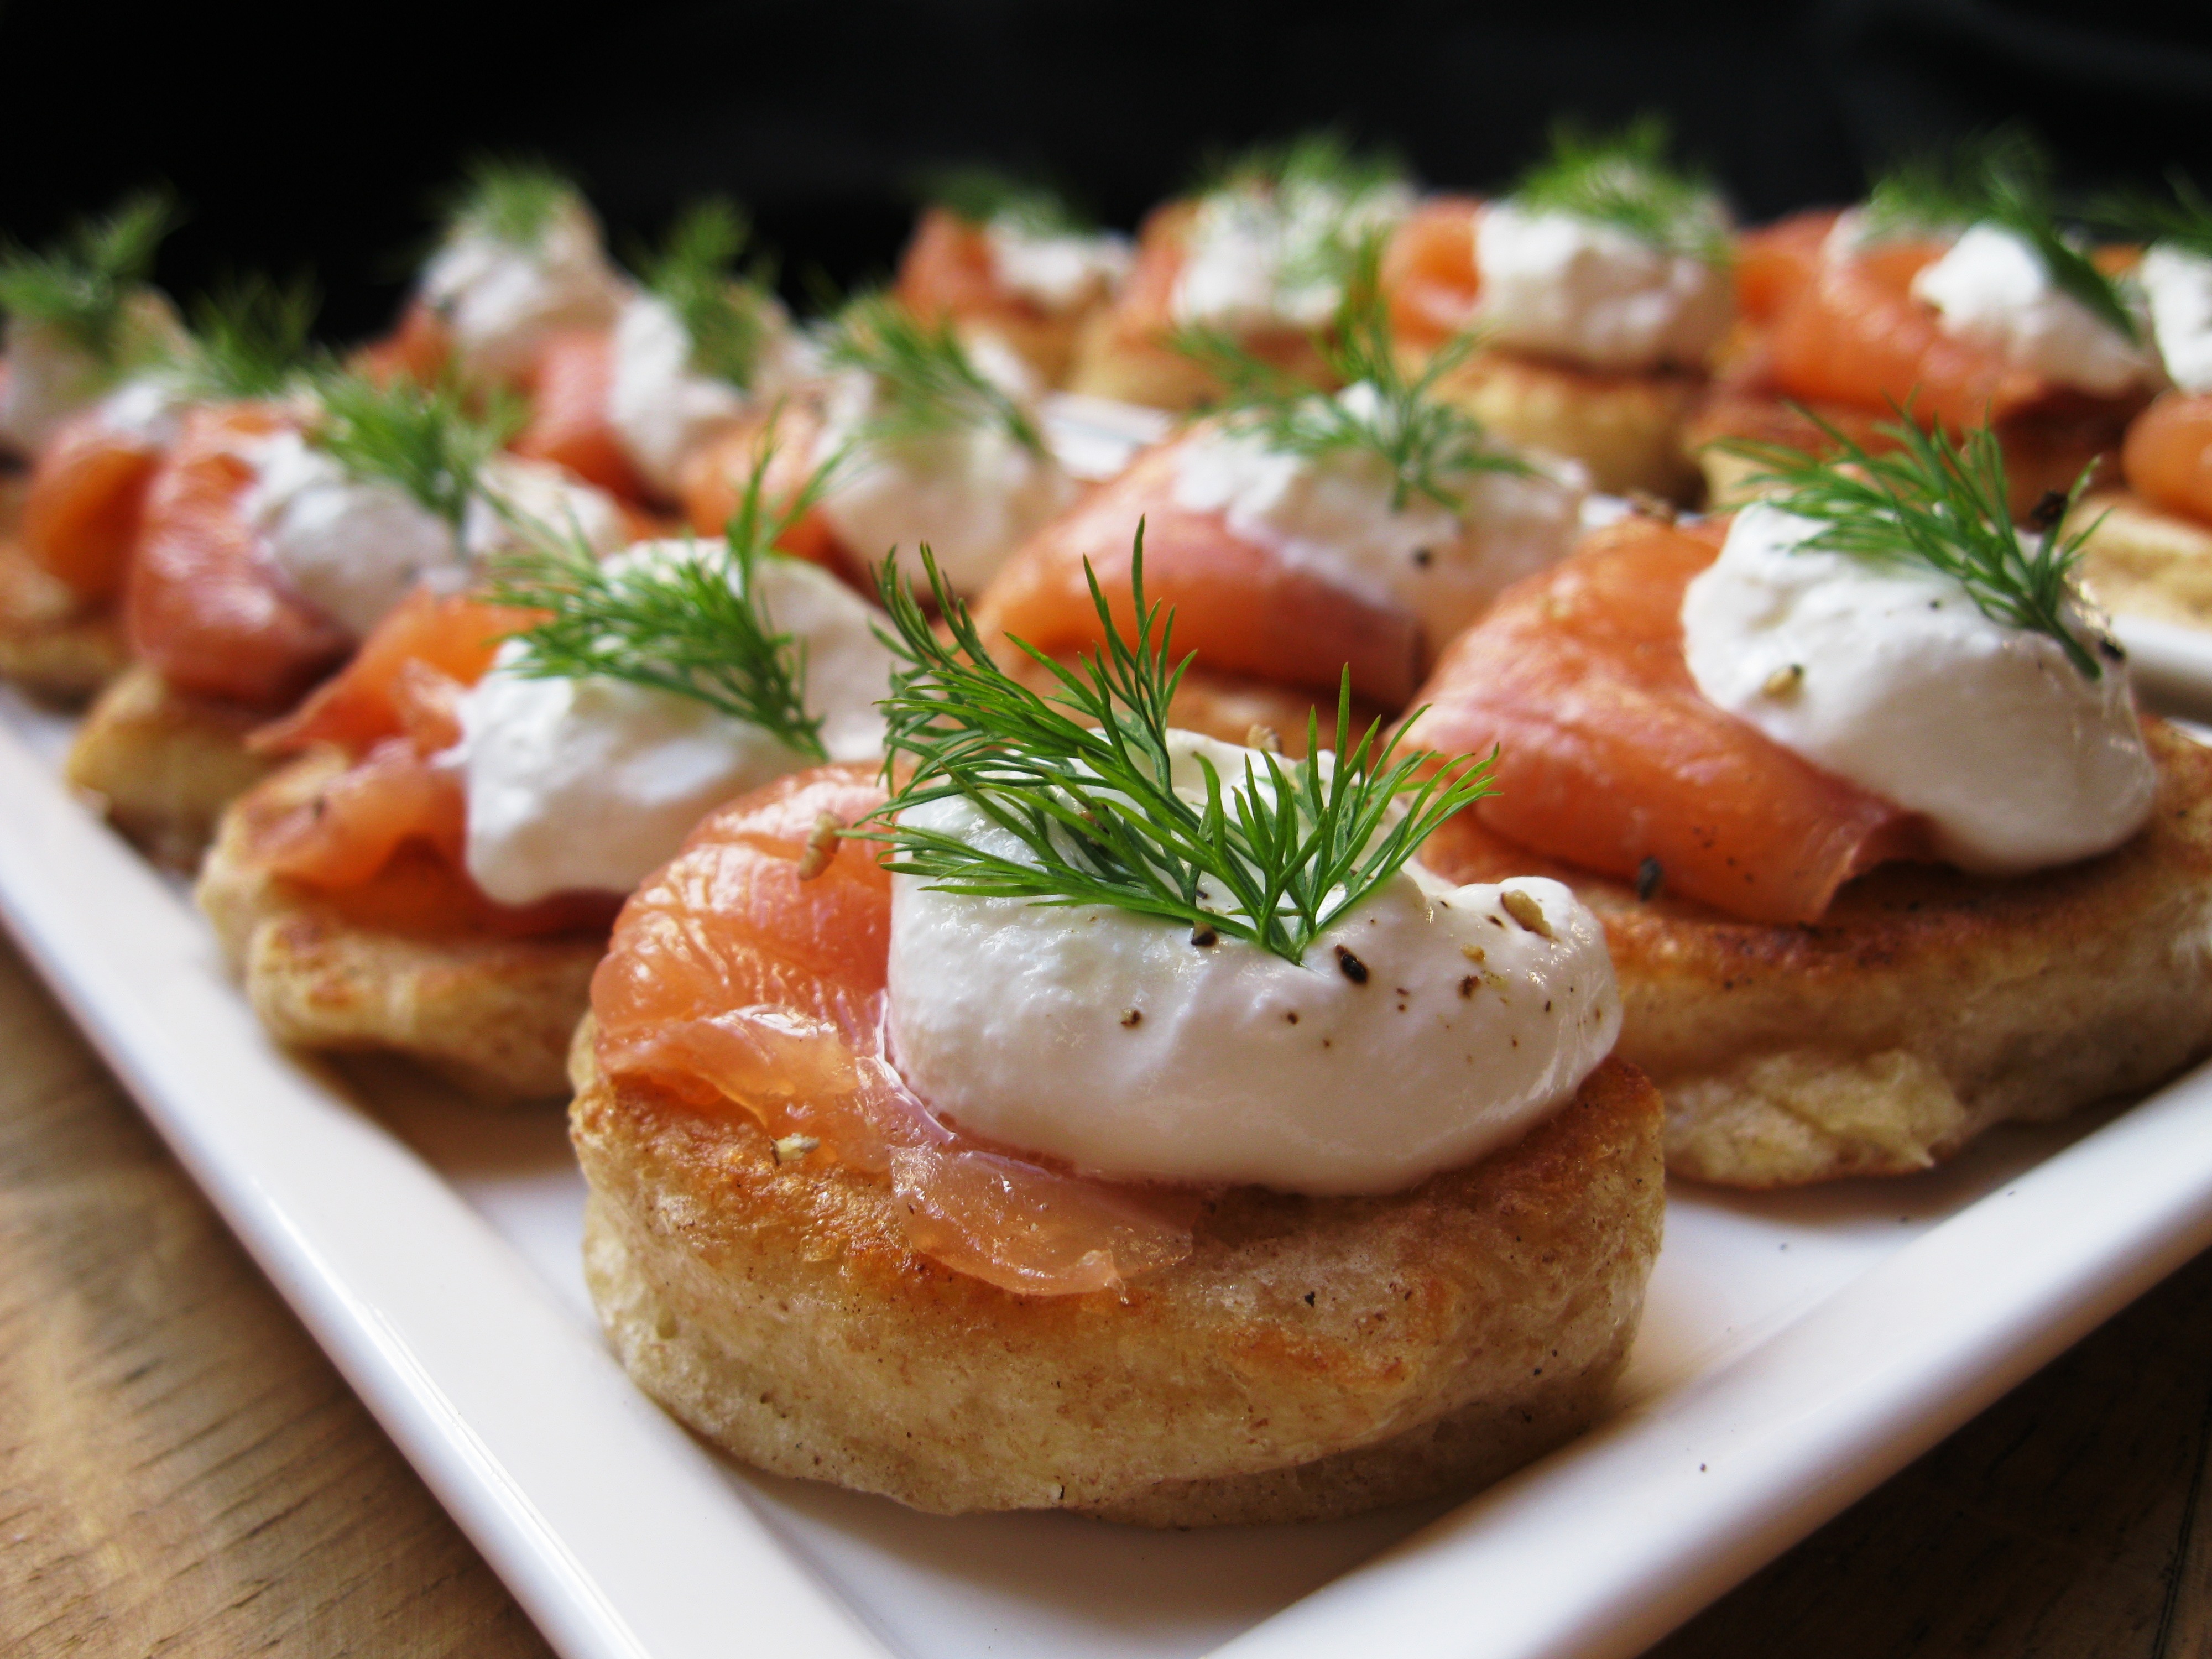 Blini with smoked salmon and dill